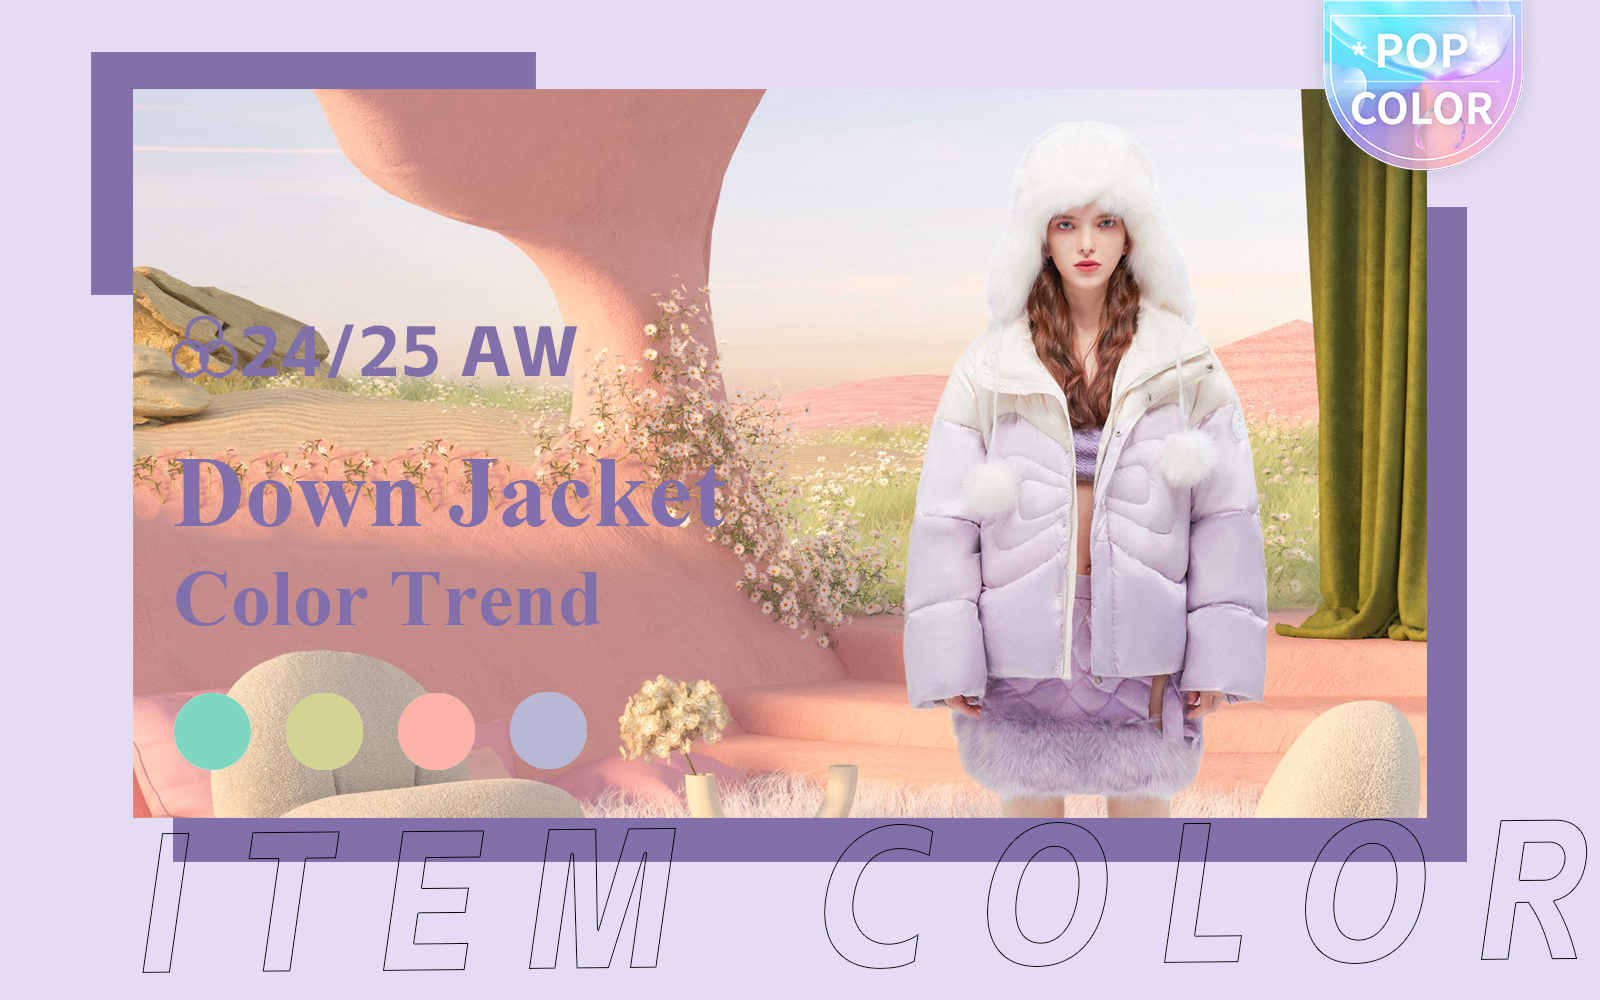 Rose & Pastel -- The Color Trend for Down Jacket